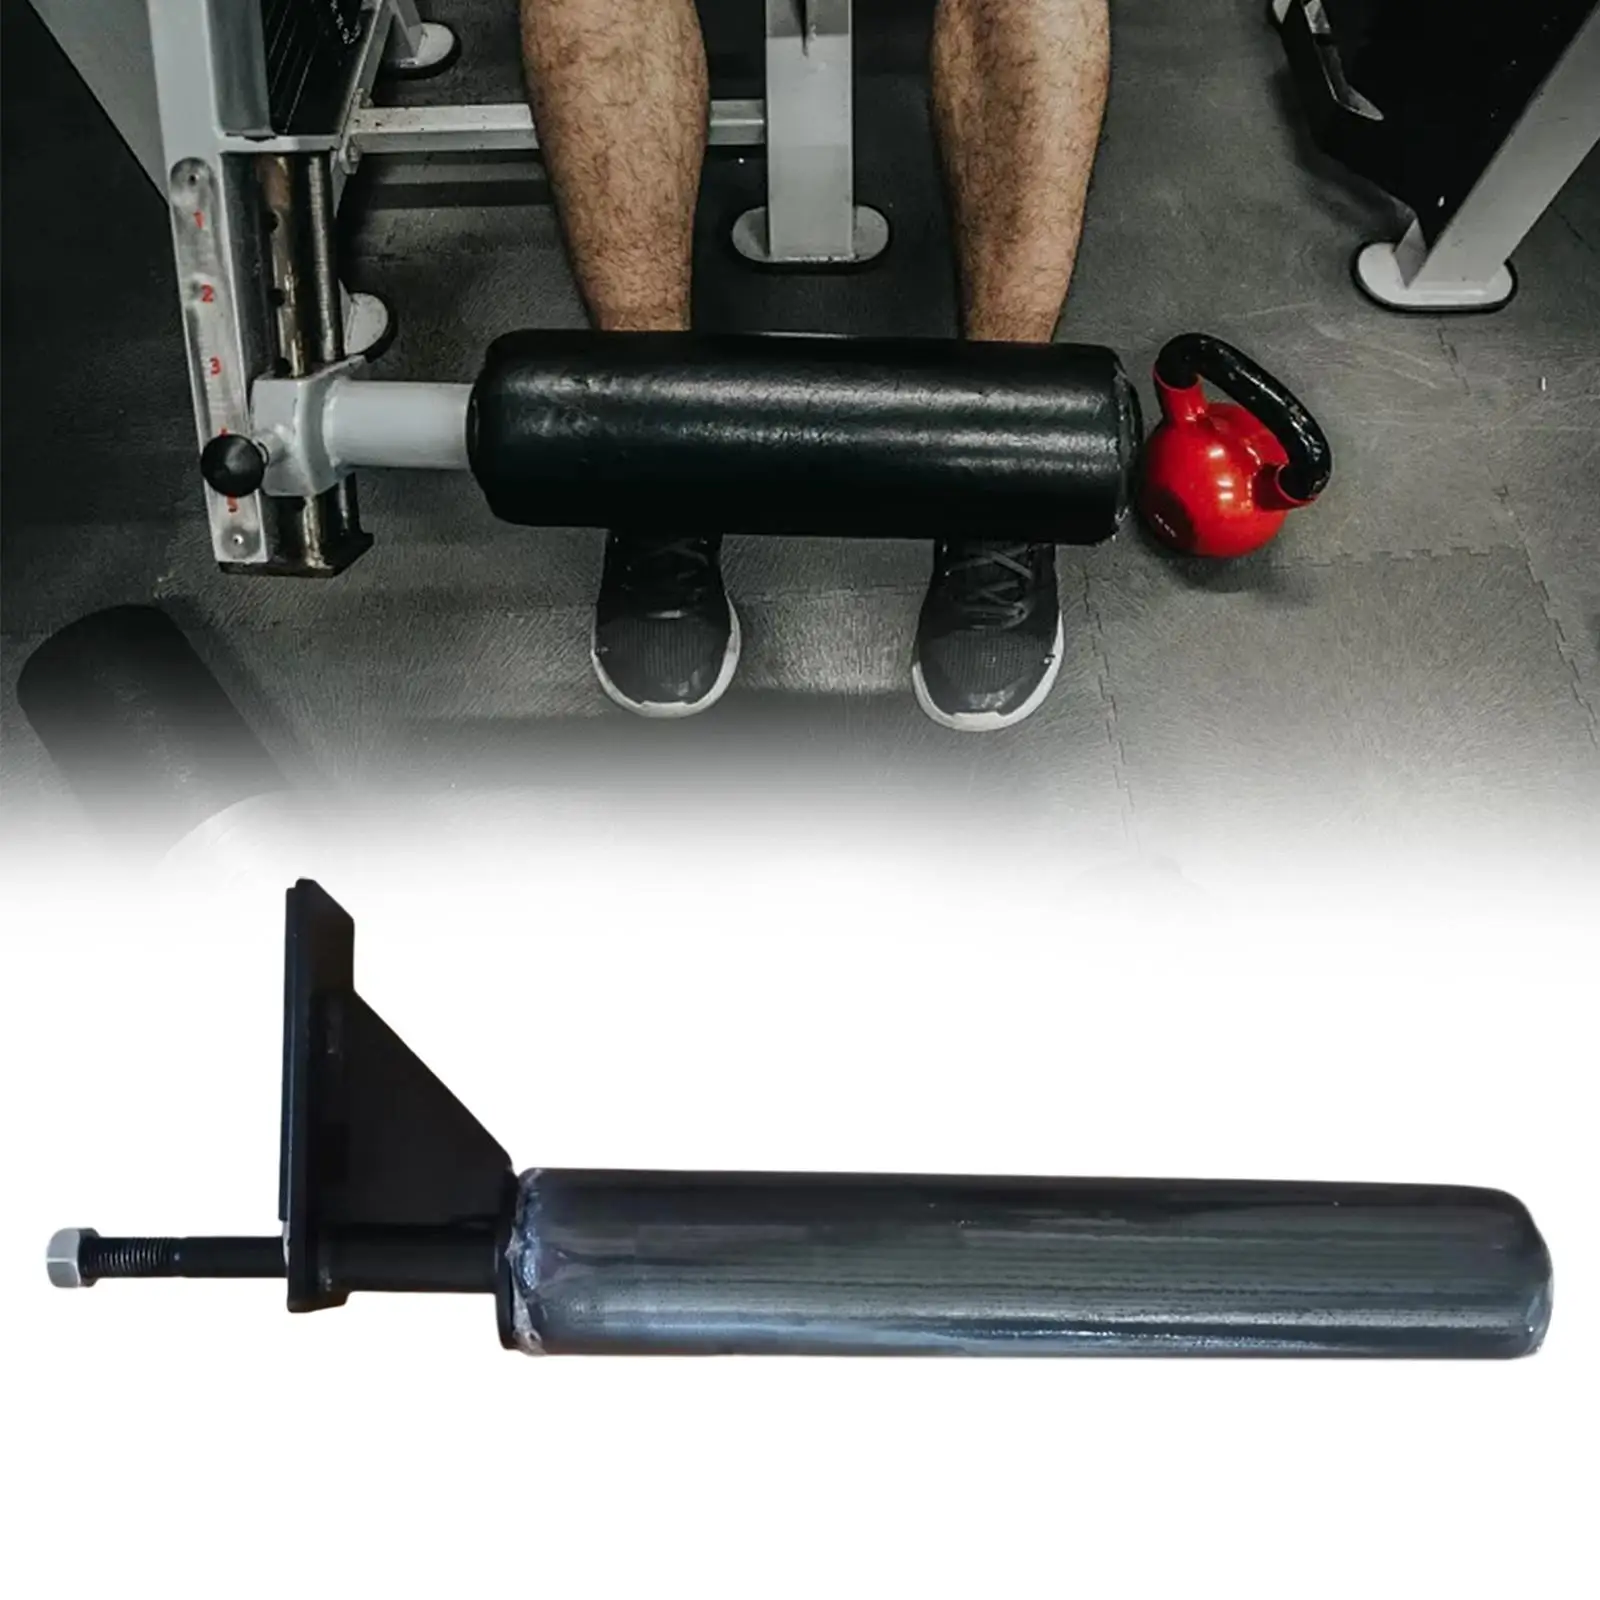 Single Leg Squat Roller Attachment with Rolling Foam Foot Rest Multifunction for Home Gym Exercise Home Gym Exercise Equipment